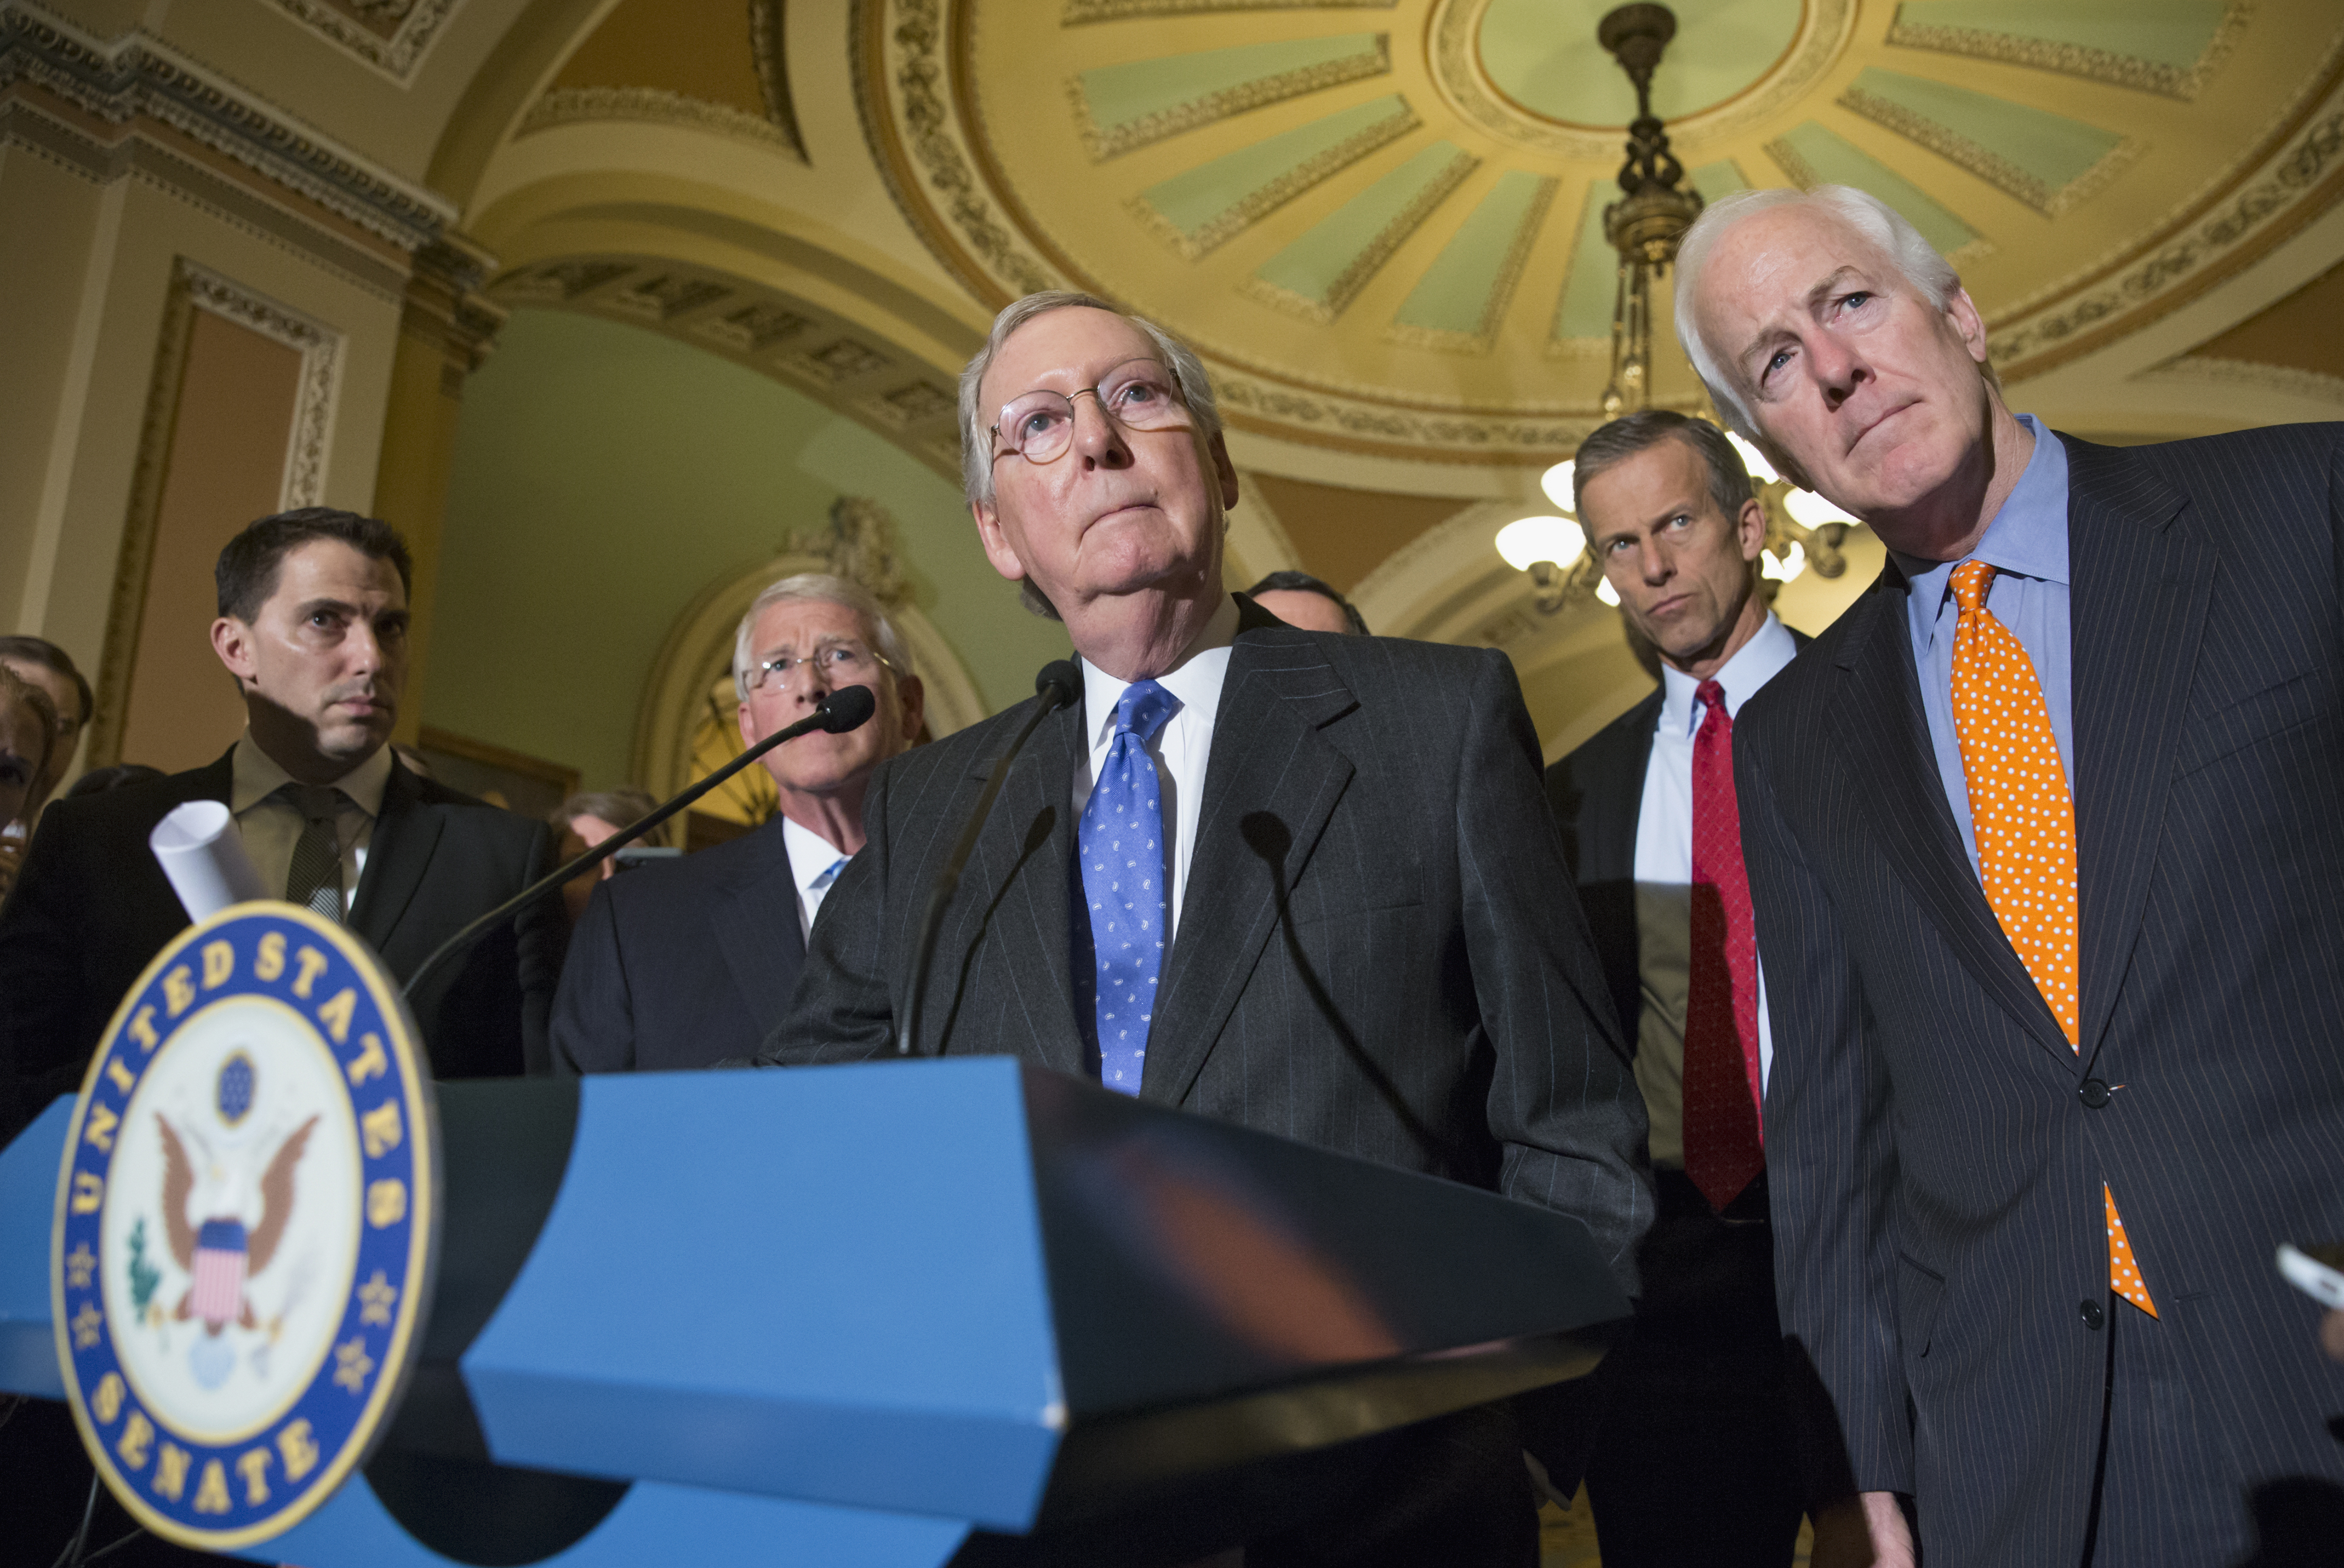 Mitch McConnell, center, speaks with reporters on Capitol Hill in Washington, D.C. on Feb. 23, 2016. (J. Scott Applewhite—AP)